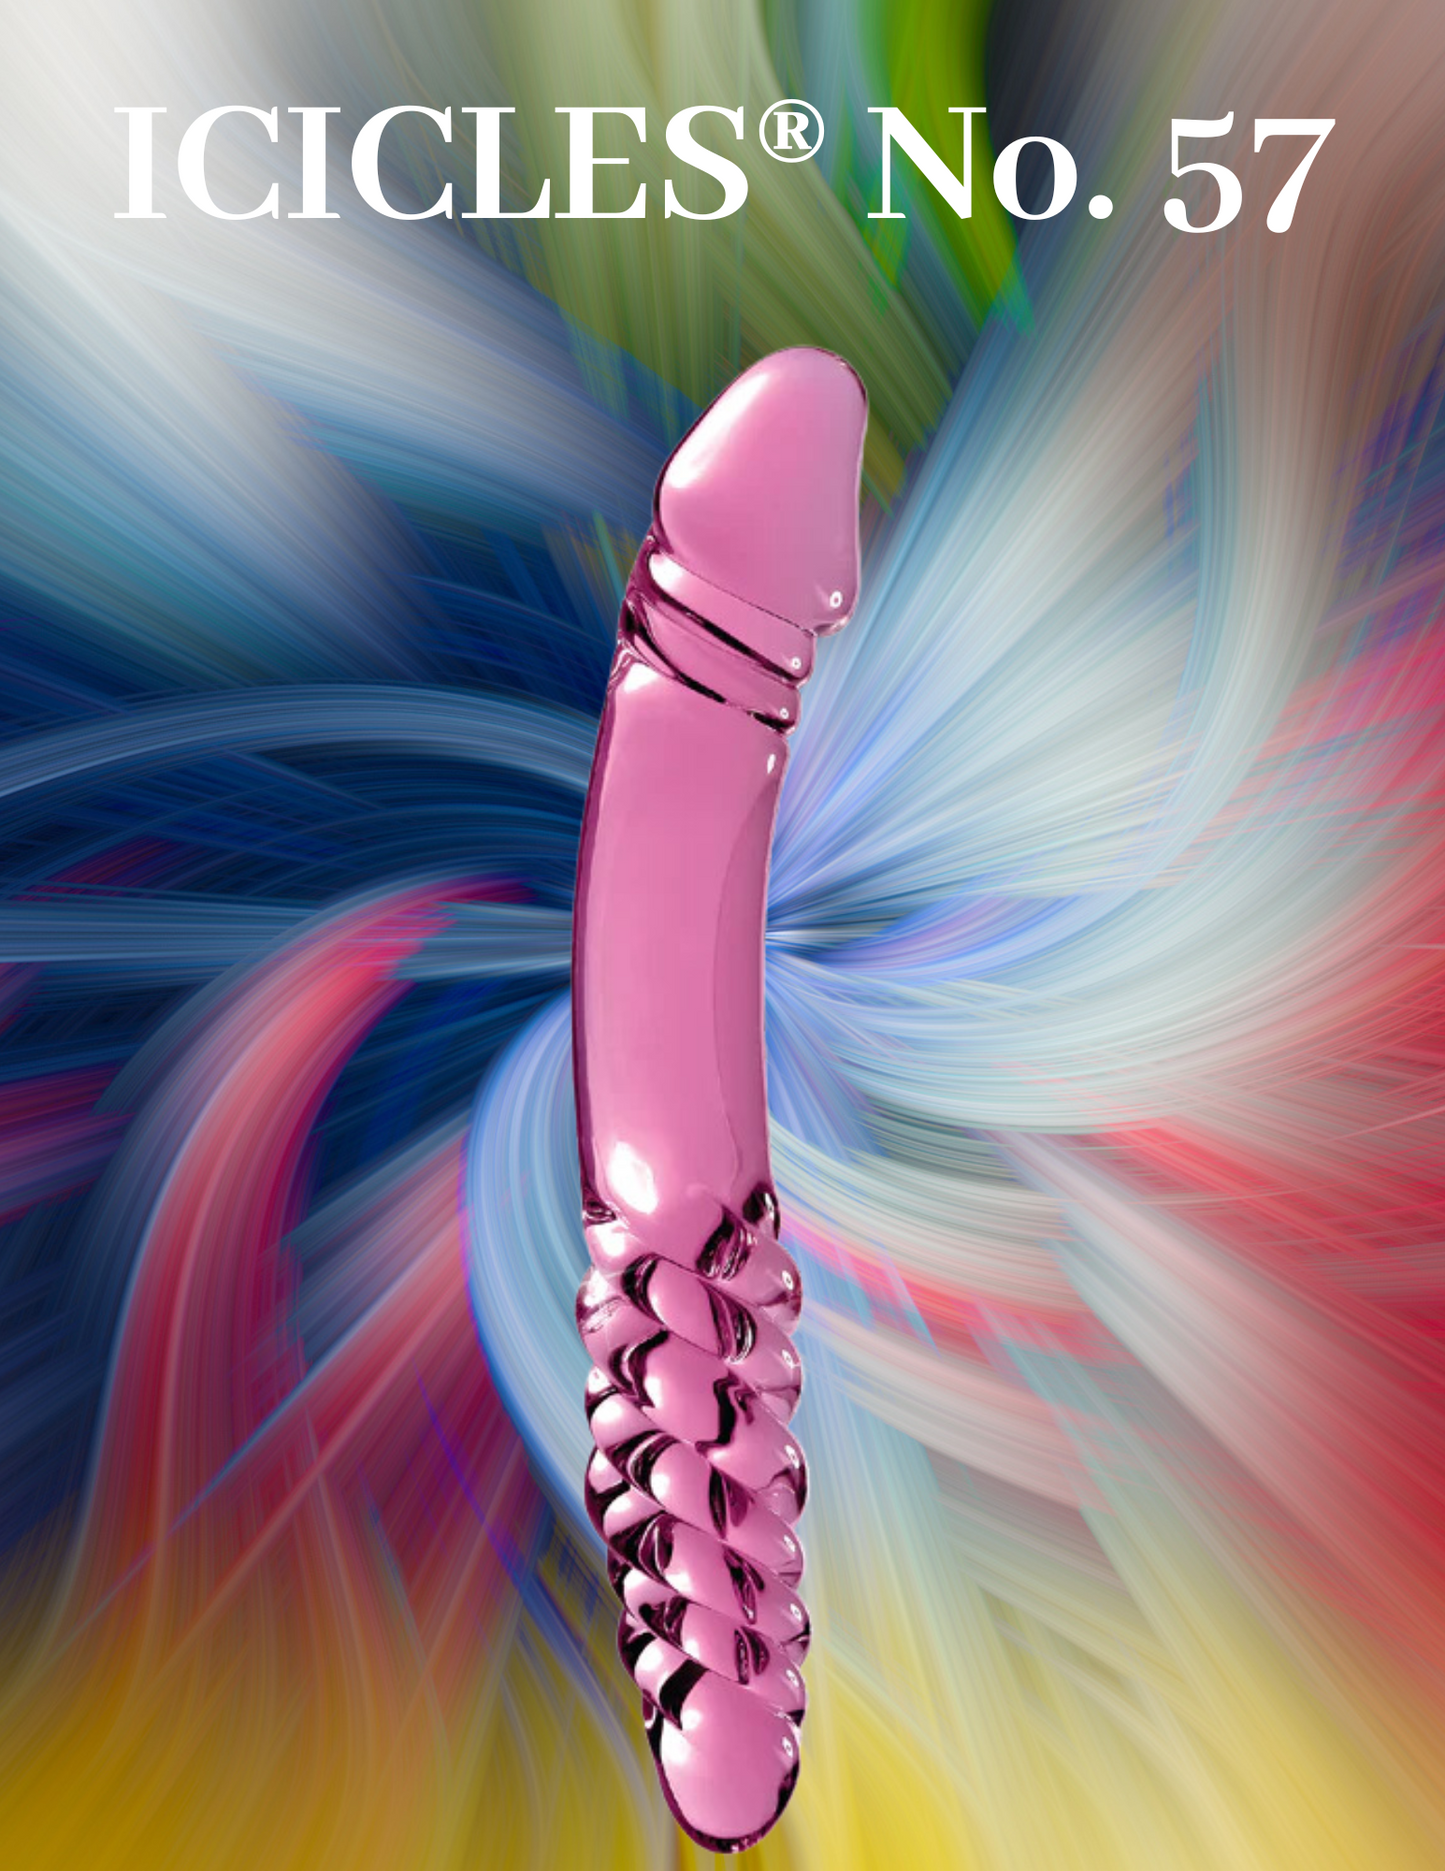 Ad for the Icicles No. 57 Double-Sided Textured Glass Dildo from Pipedreams (pink).